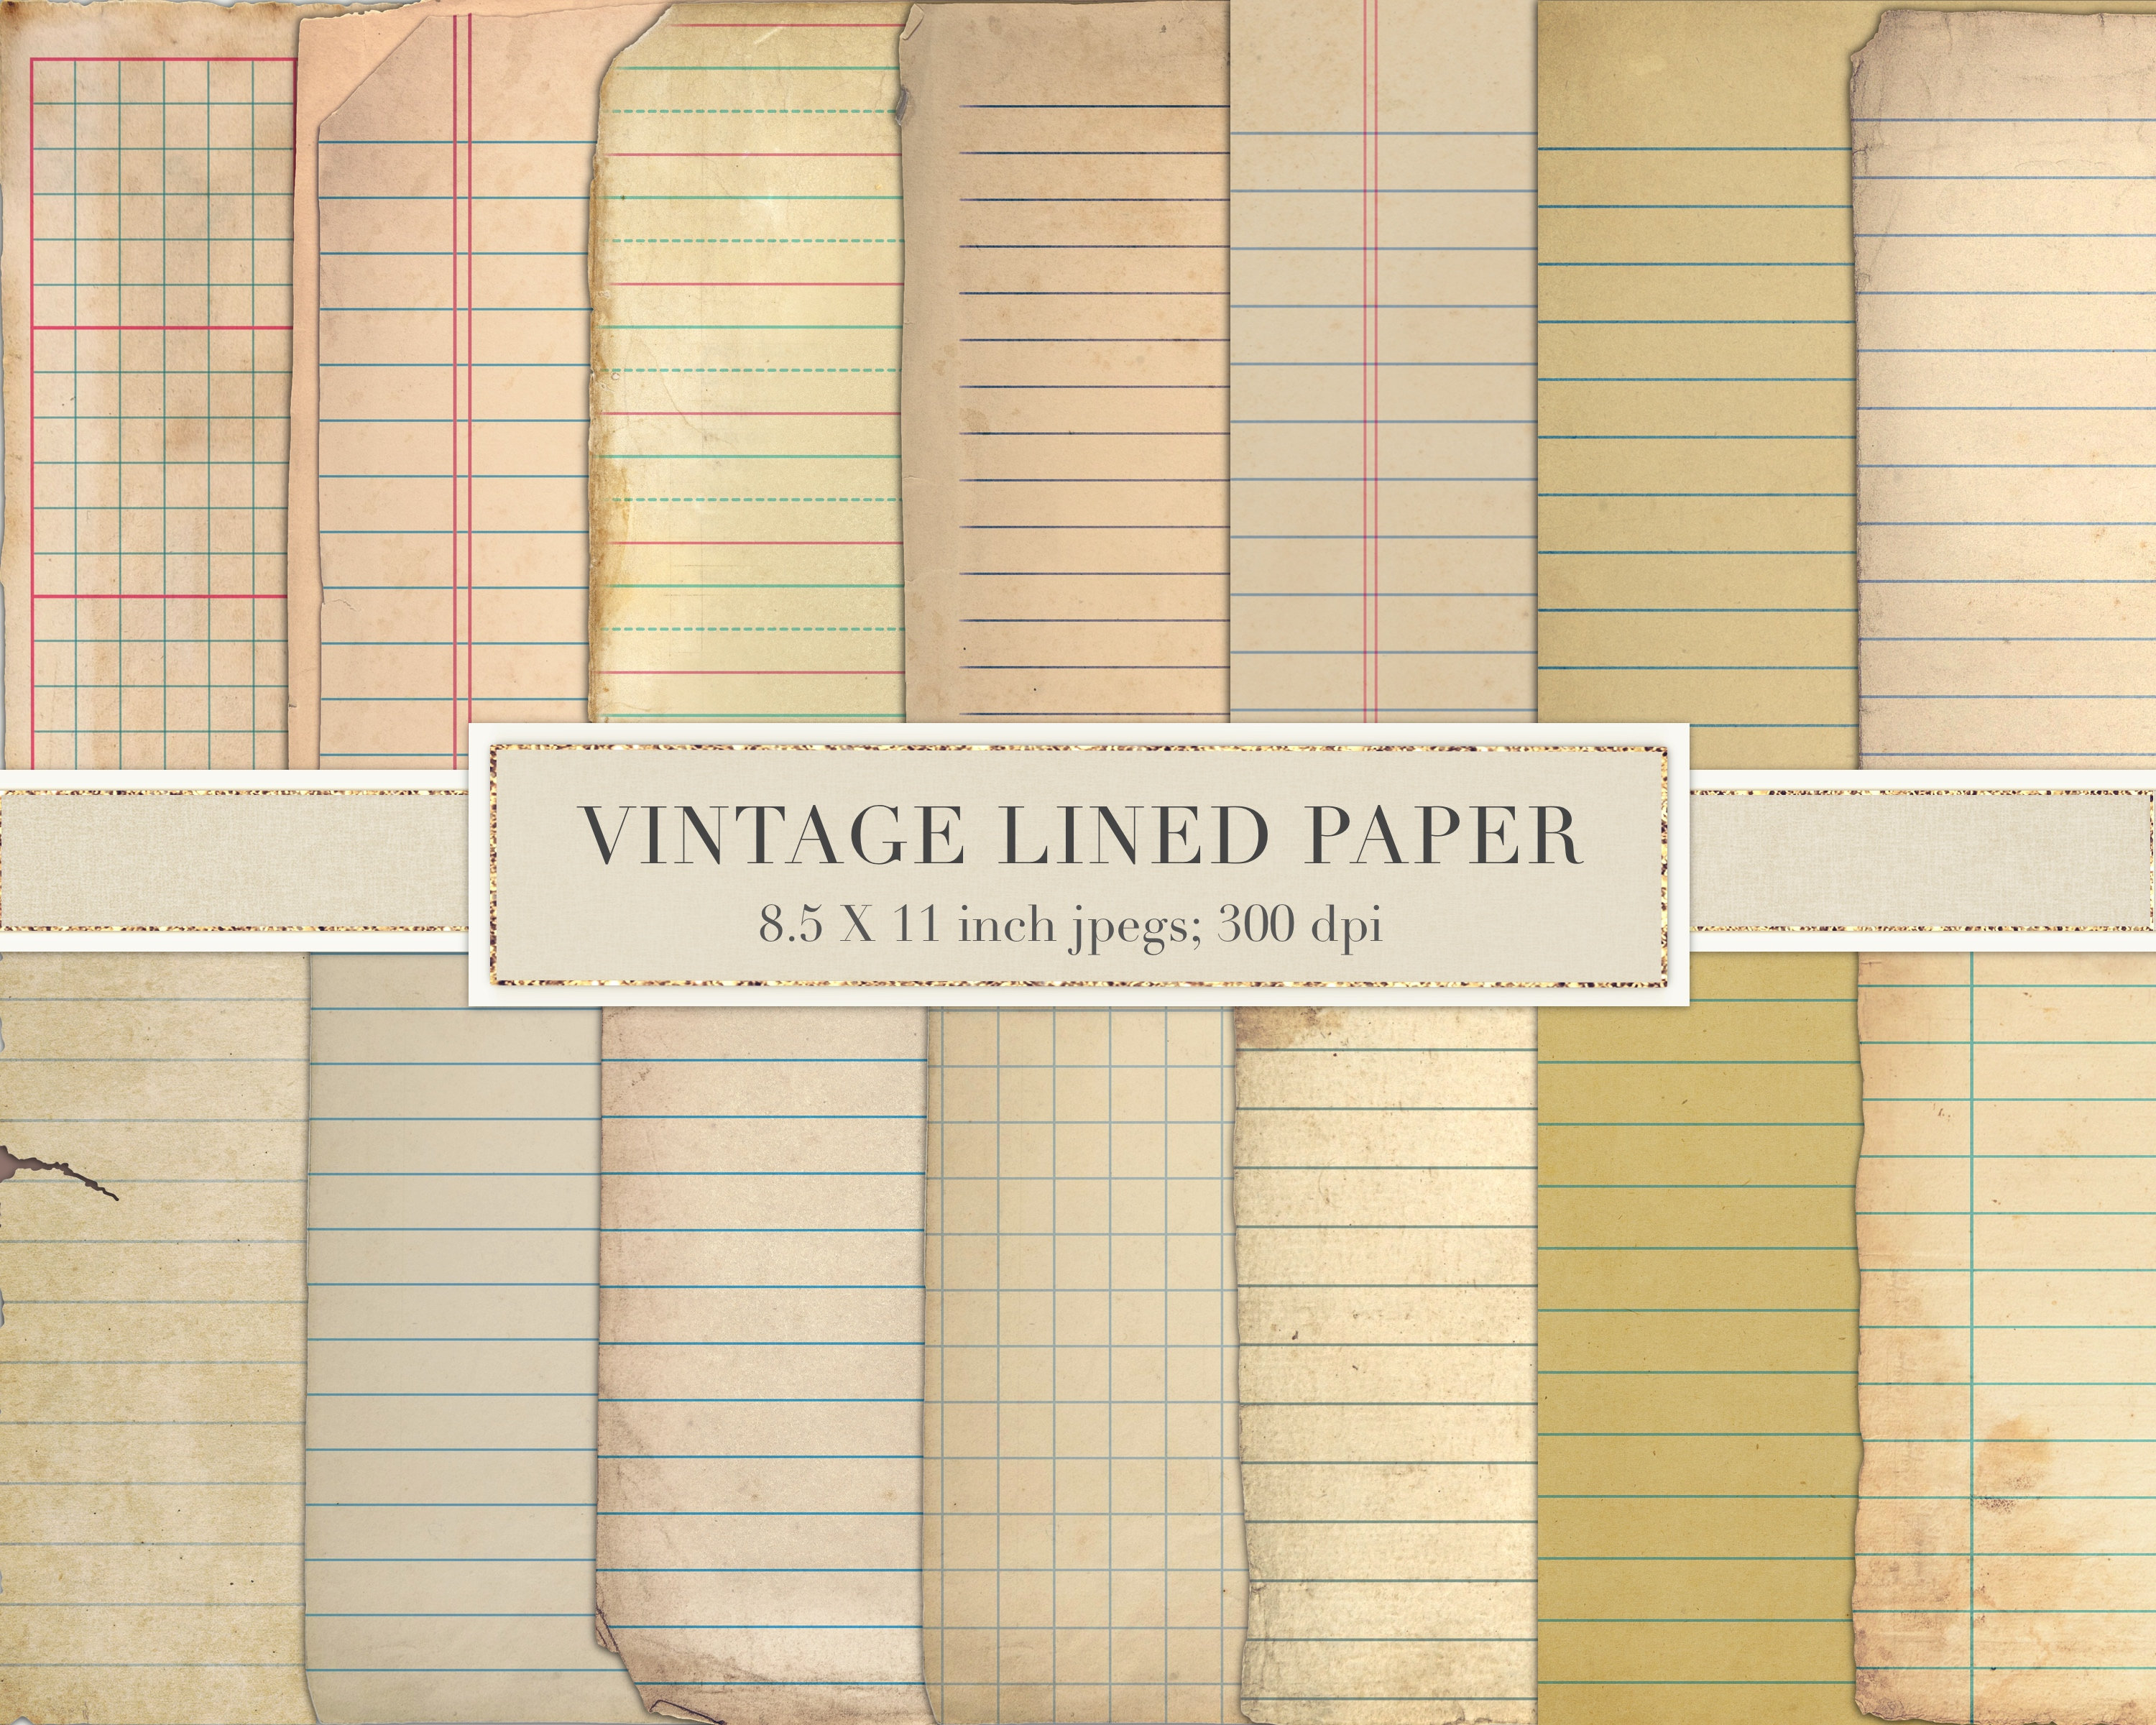 48 Sheets Vintage Lined Paper with Antique Border Design, Aged Stationery  for Writing Letters, Invitations (8.5 x 11 In)